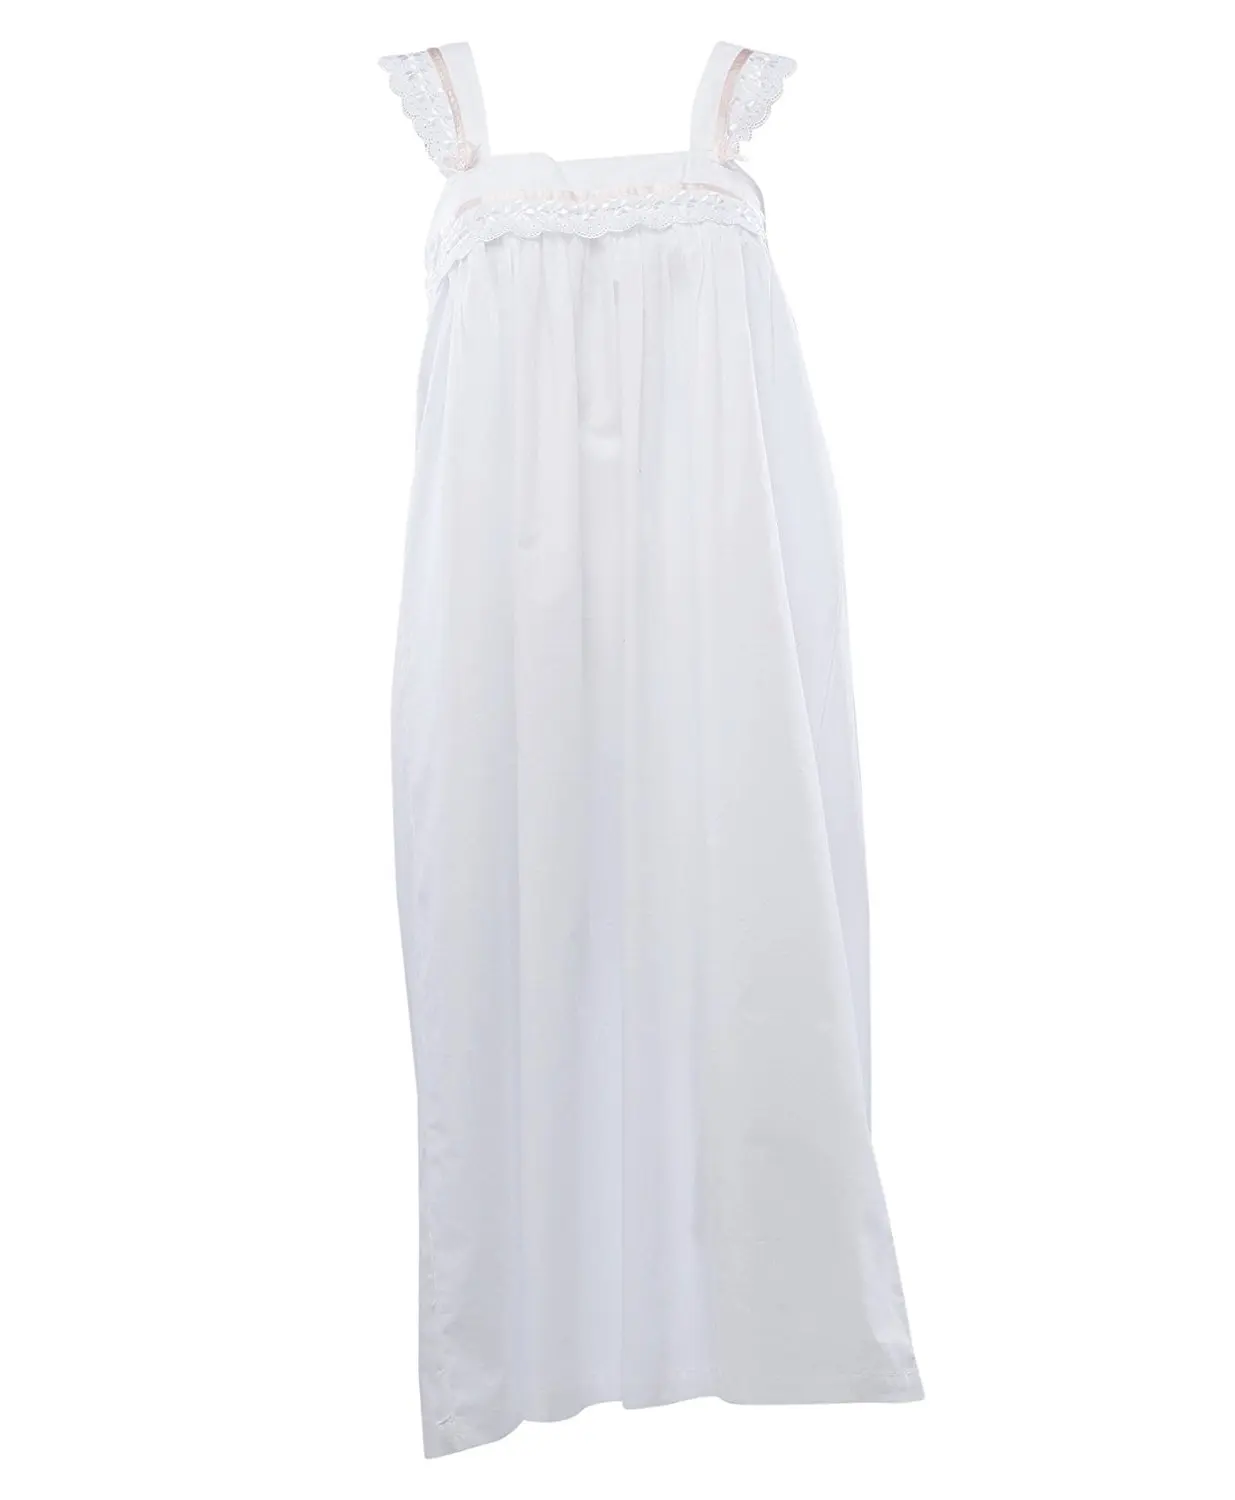 Buy Ladies Long White Broderie Anglaise Cotton Tunic Top Womens Sizes 6 ...